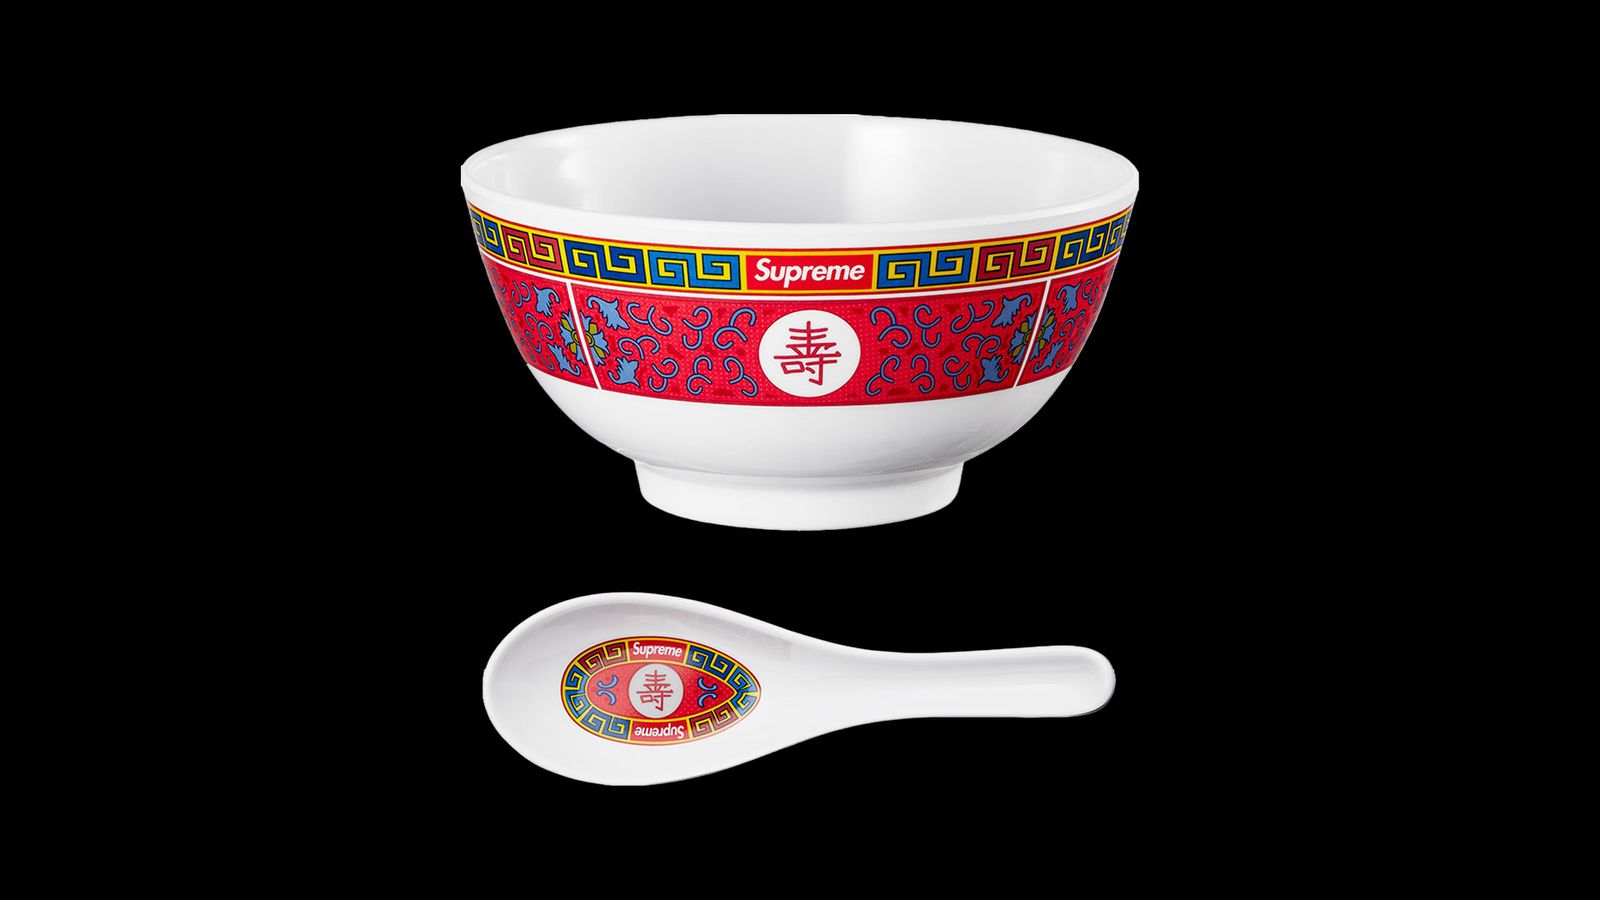 Supreme Longevity Soup Set product image of a white bowl and soup spoon featuring a red and blue pattern.